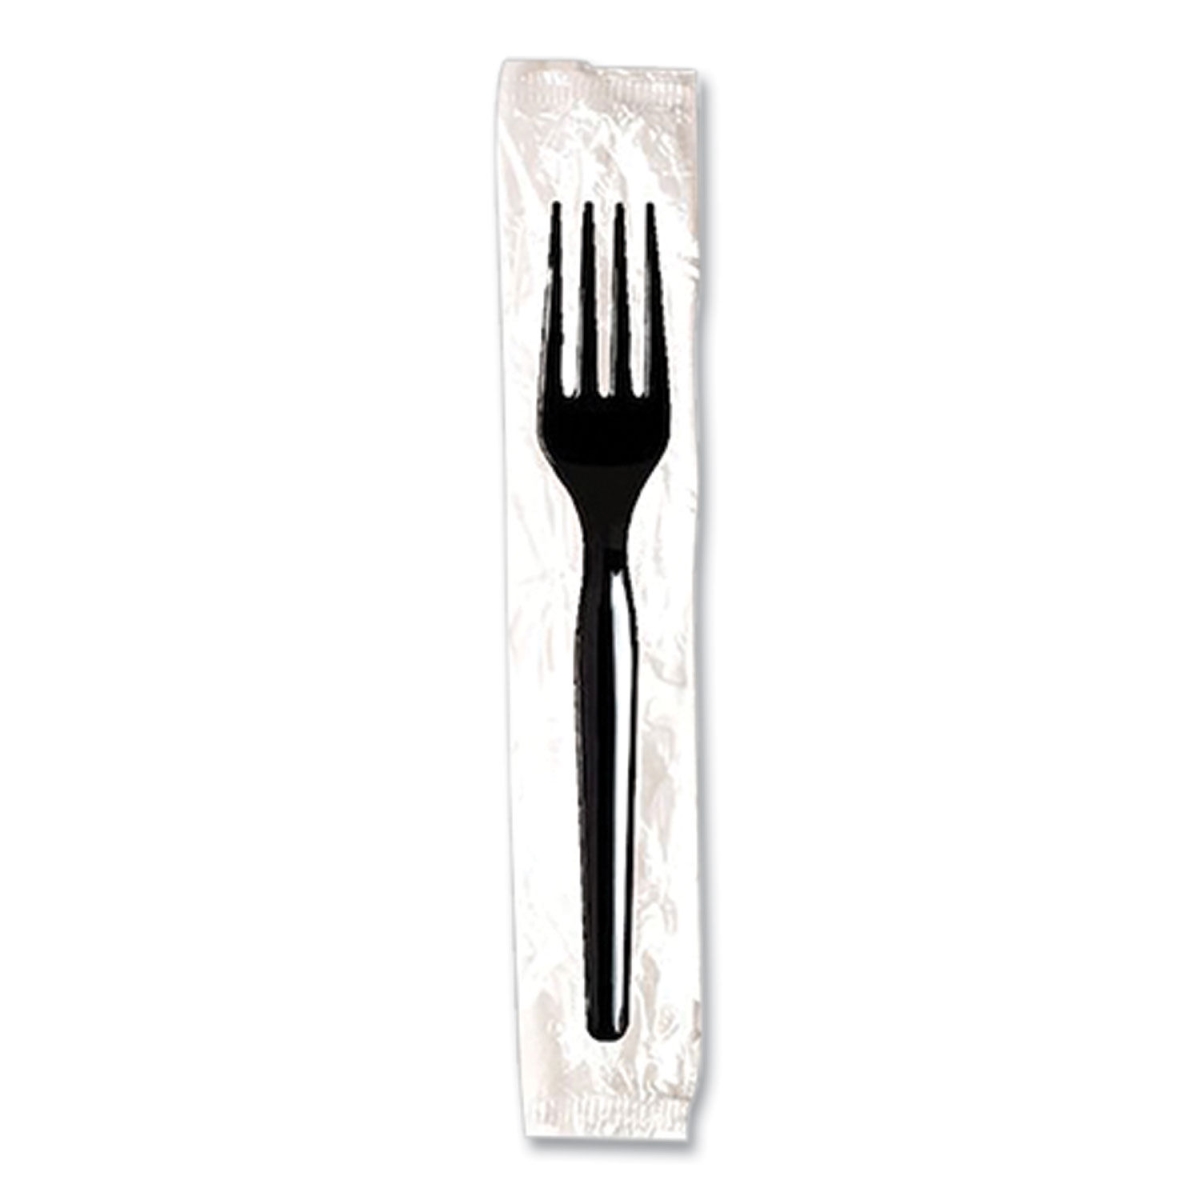 Picture of Dixie DXEFM53C7 Polystyrene Cutlery Fork, Black - 1000 Count